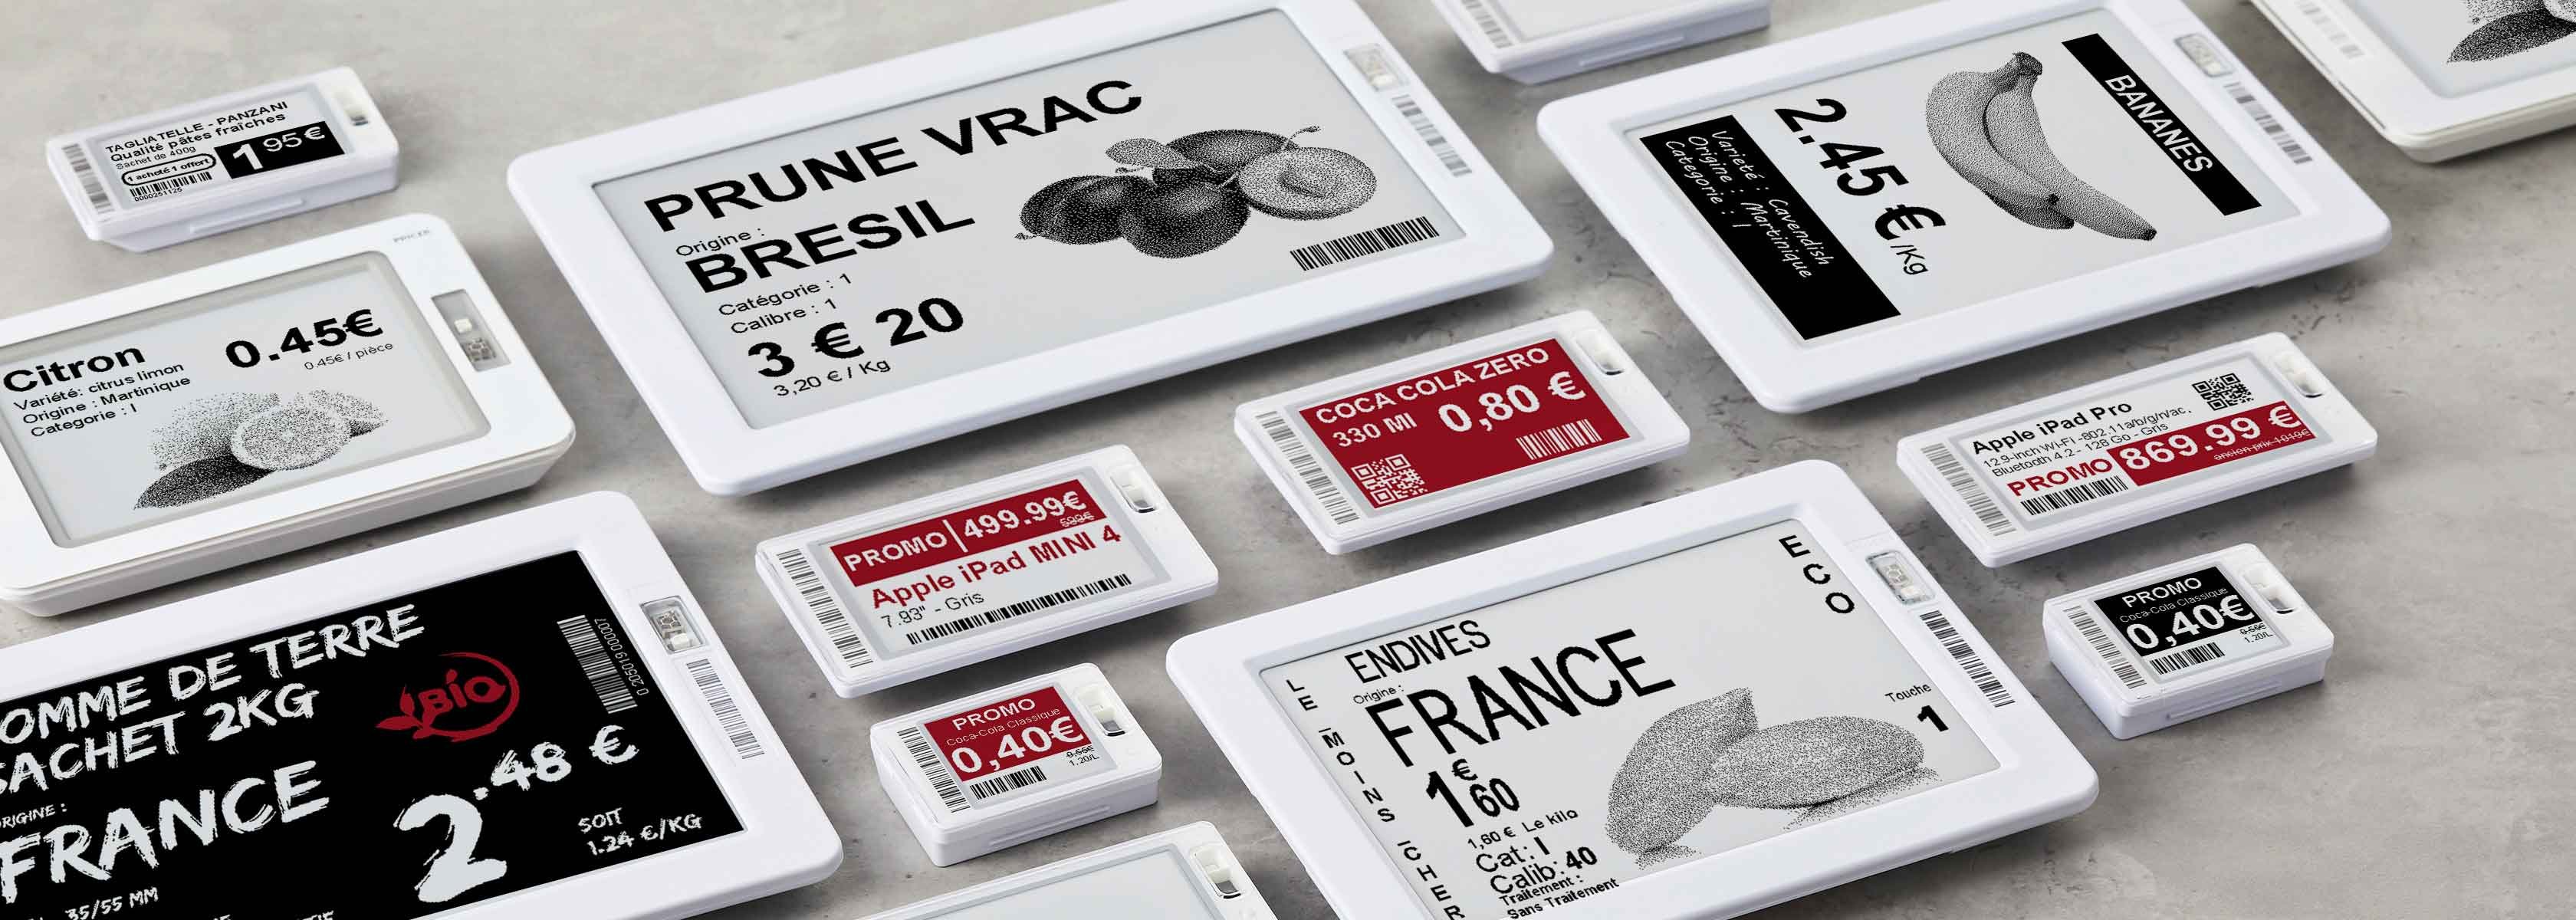 Digital Price Tags - Most reliable Electronic Shelf Label System